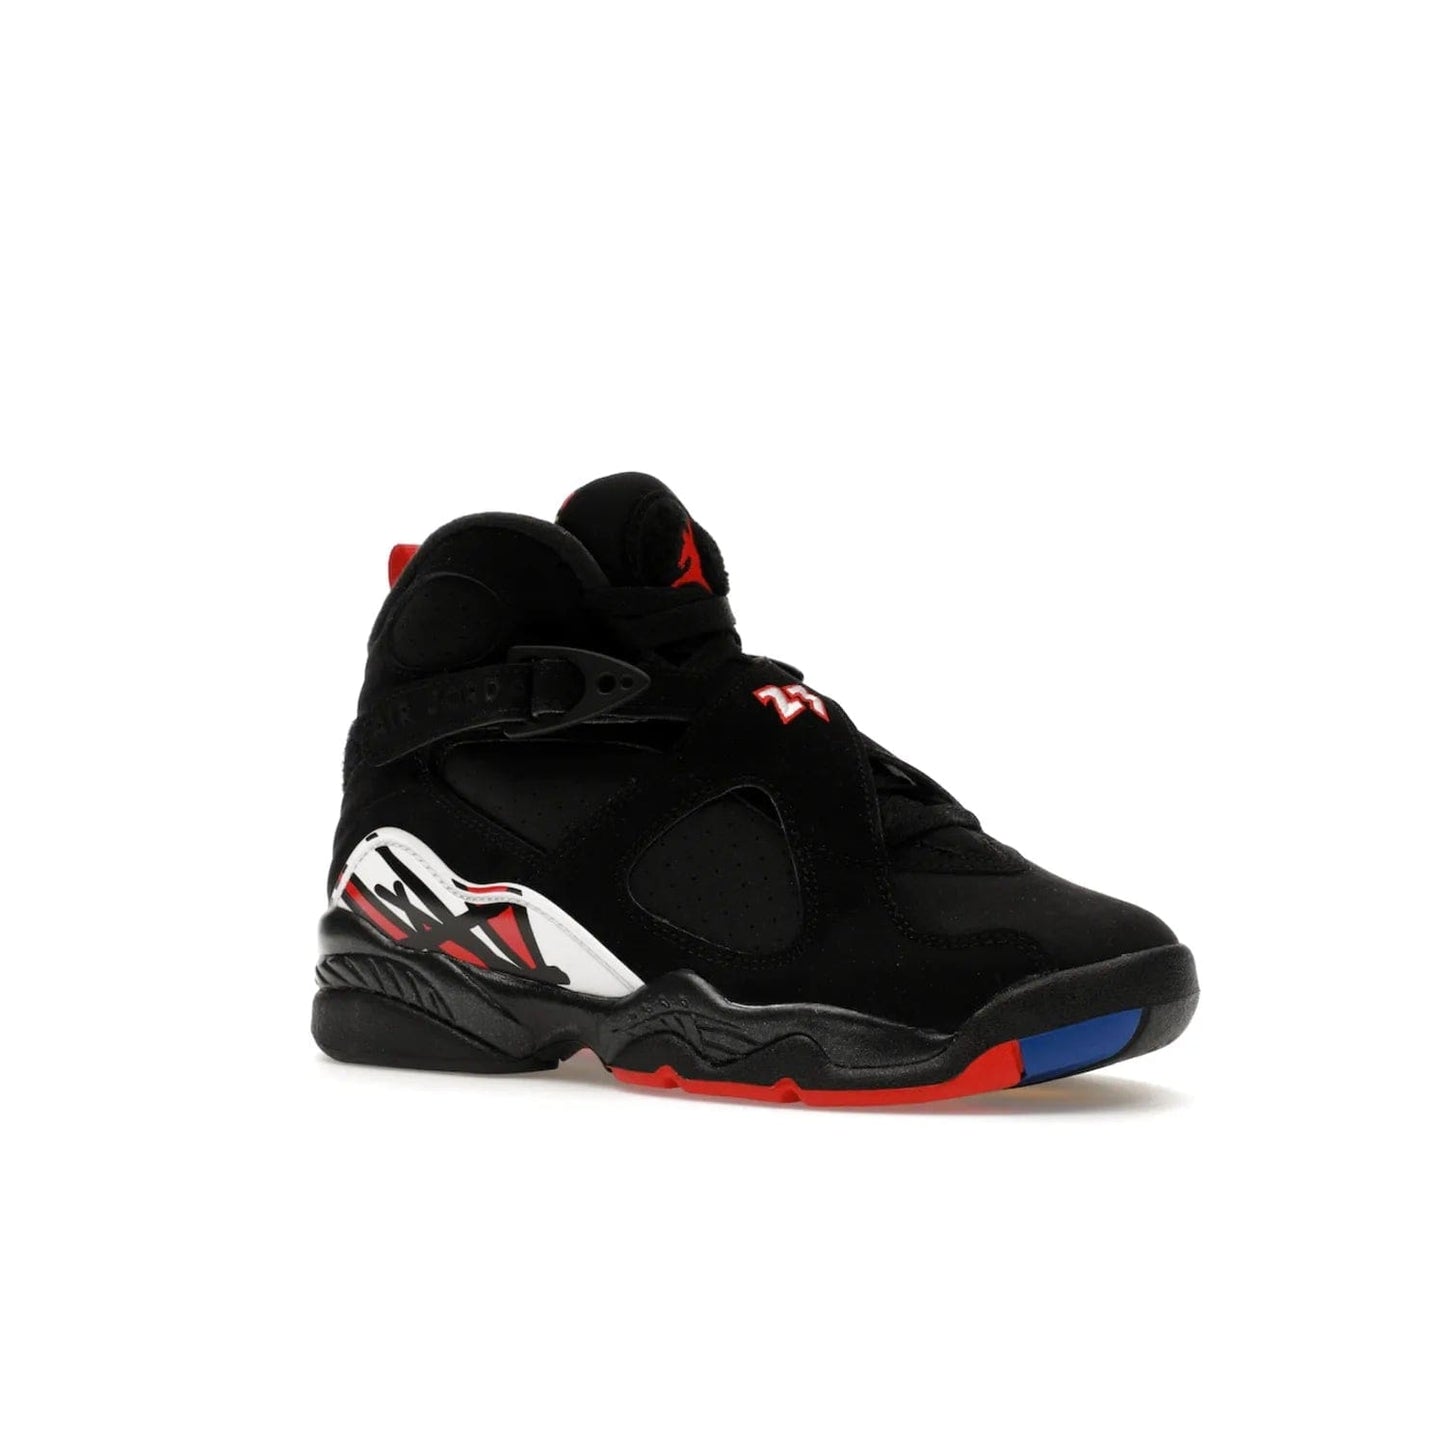 Jordan 8 Retro Playoffs (2023) (GS) - Image 4 - Only at www.BallersClubKickz.com - Sneaker lovers, the new Jordan 8 Retro Playoffs (2023) (GS) features black, true red, and white colors for a modern and eye-catching design. Comfort and style combine for an unforgettable look, releasing in 2023.